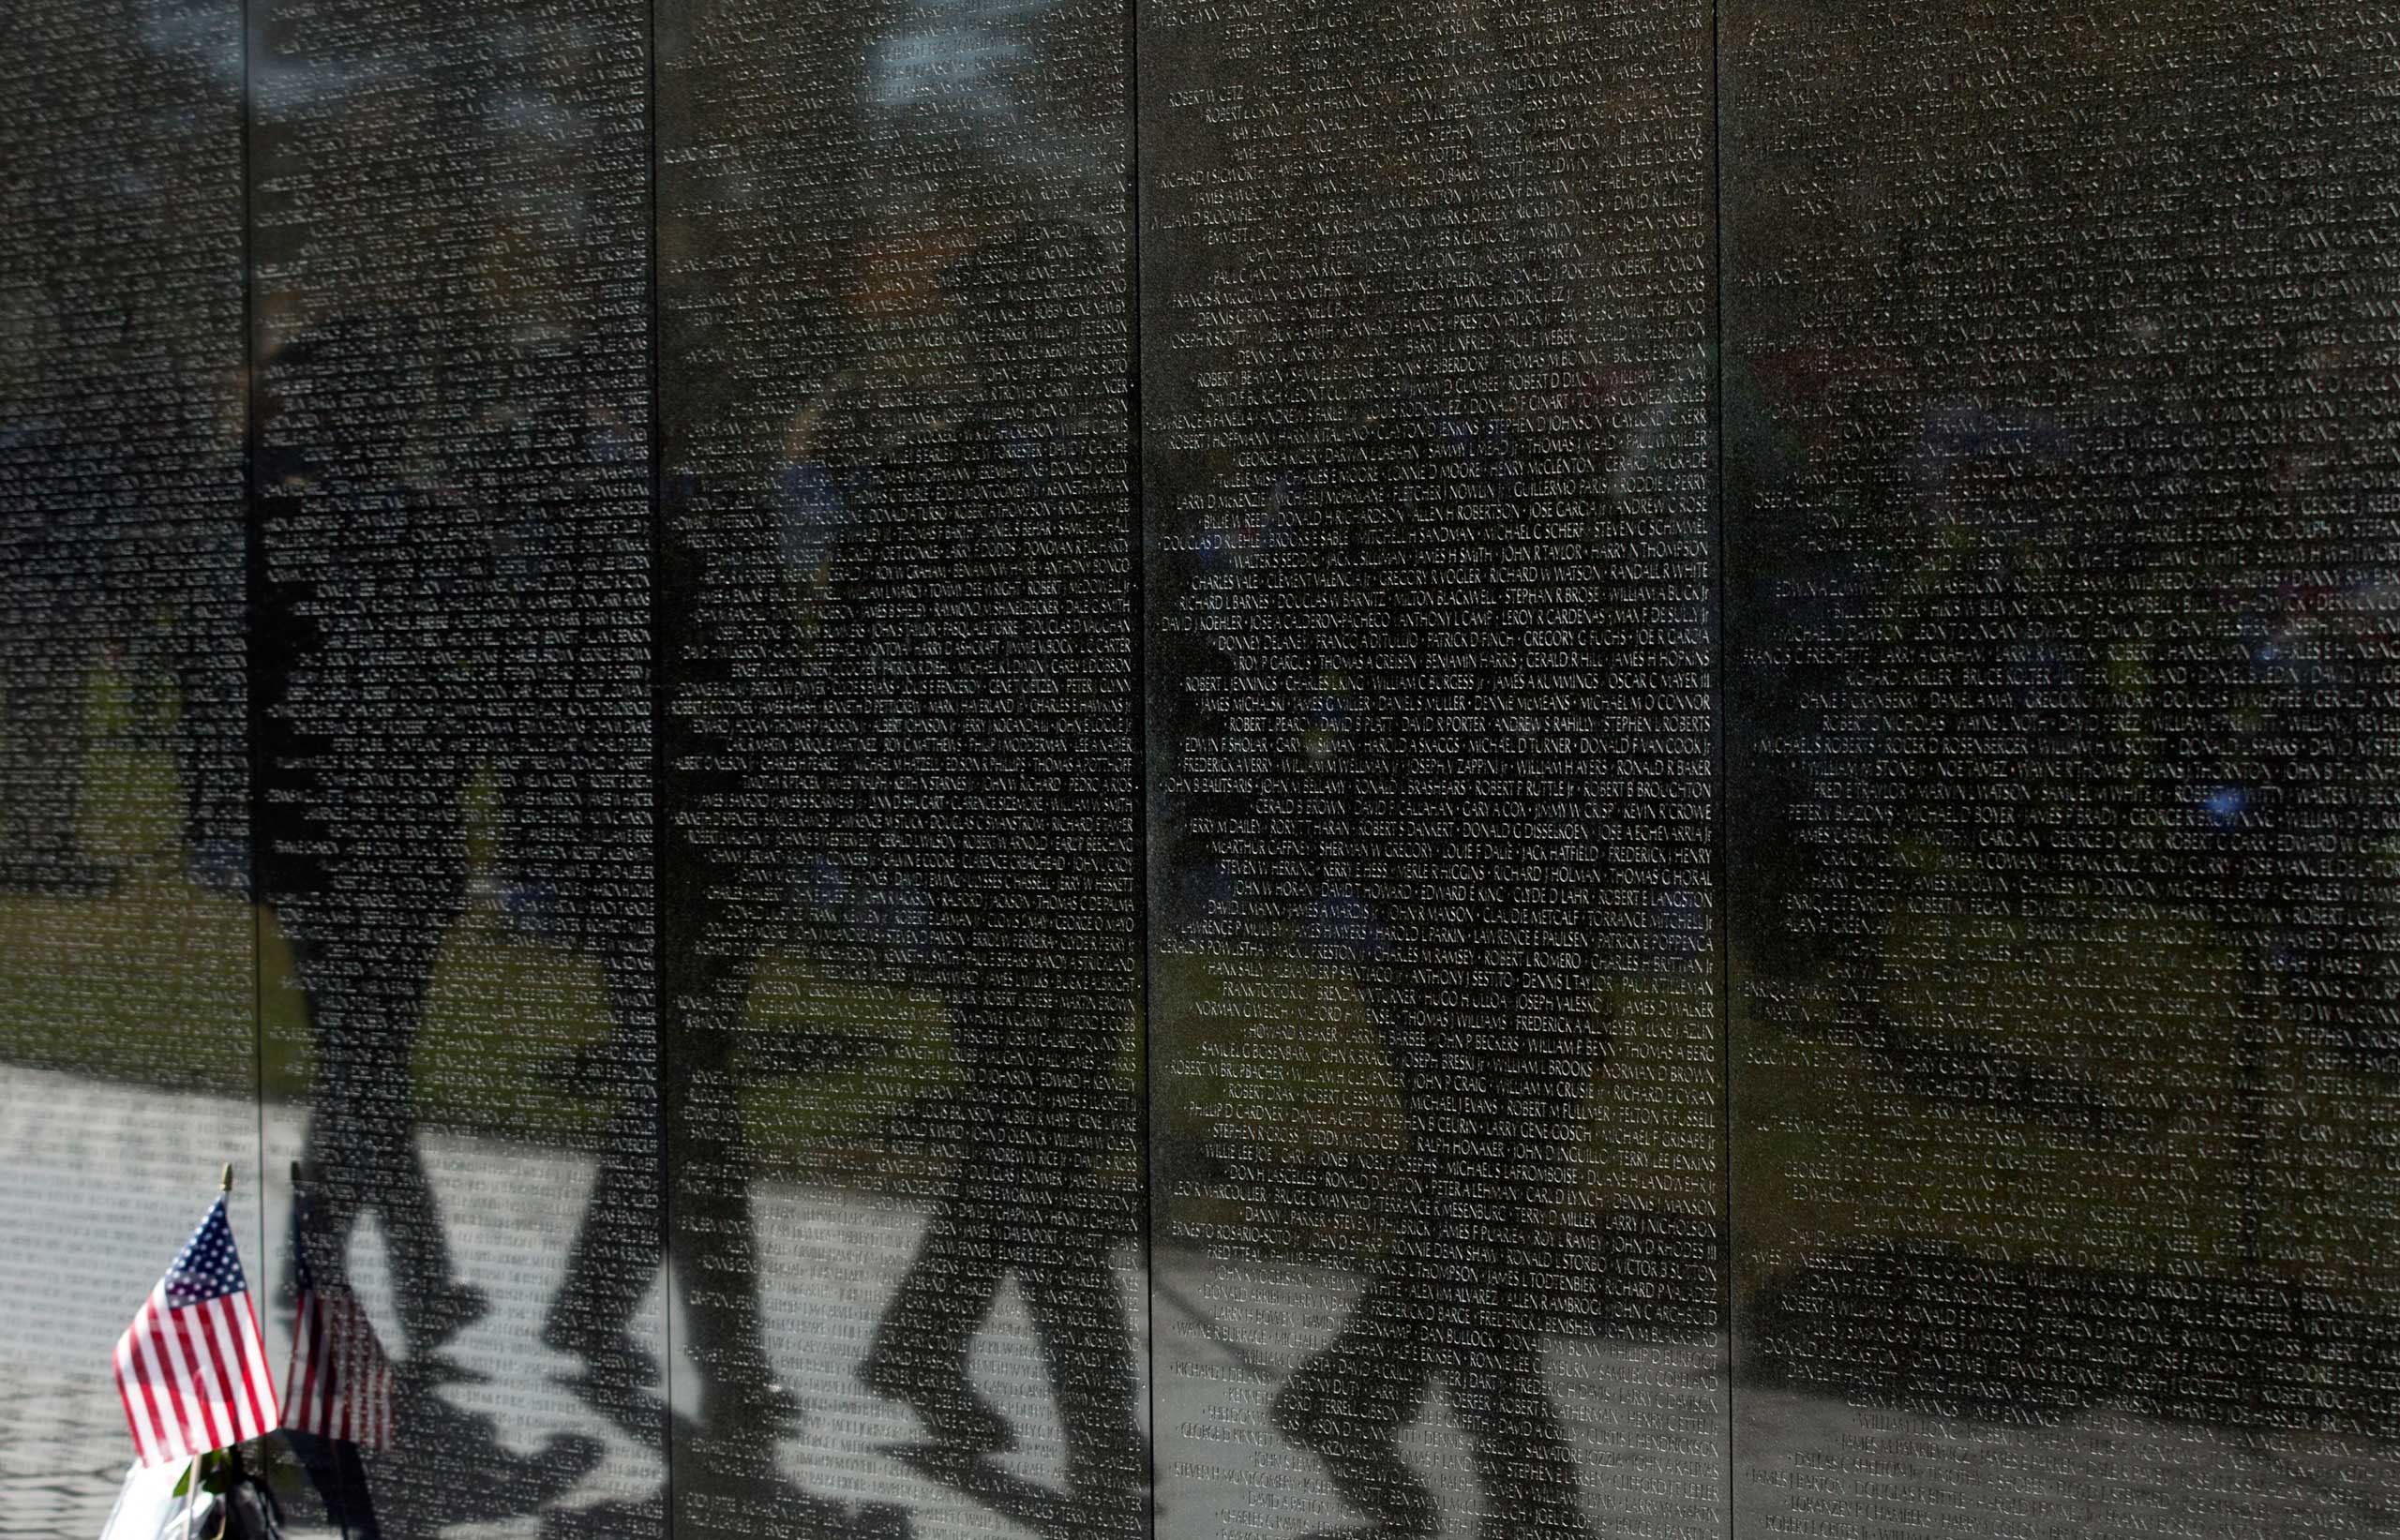 Nov. 11, 2014. The U.S. Park Police honor guards are reflected in the Vietnam Veterans Wall Memorial as they march during a ceremony to commemorate Veterans Day, in Washington, D.C.